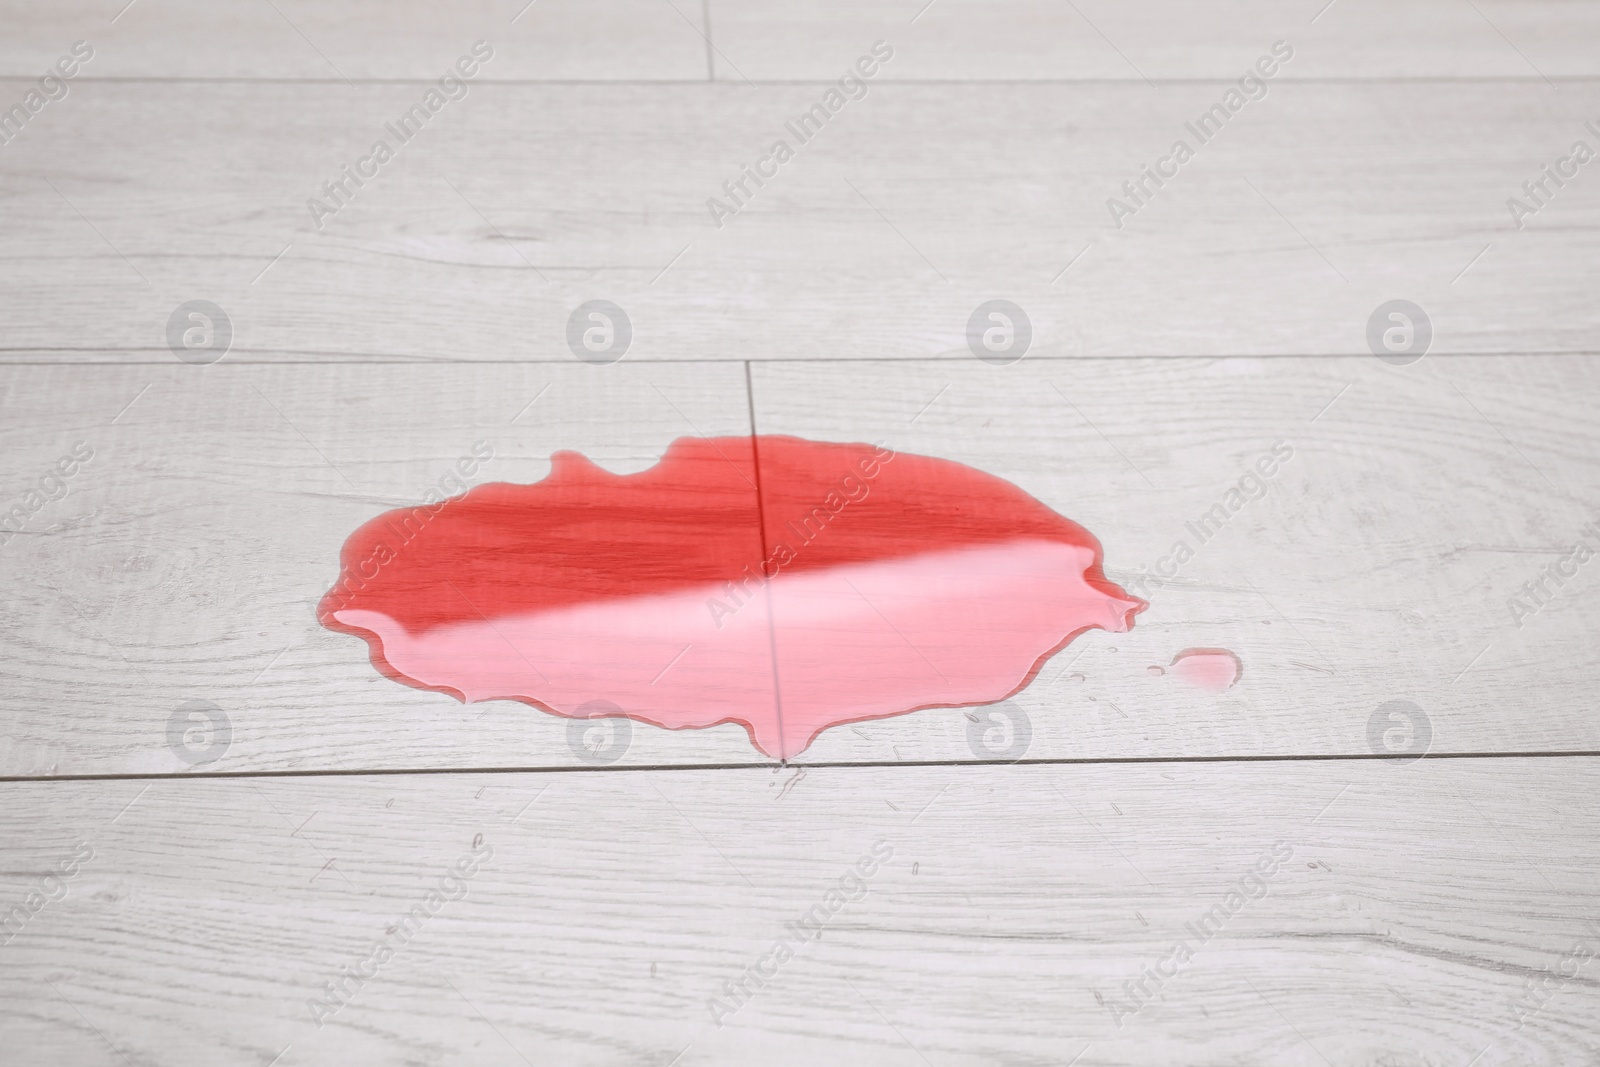 Photo of Puddle of red liquid on wooden floor